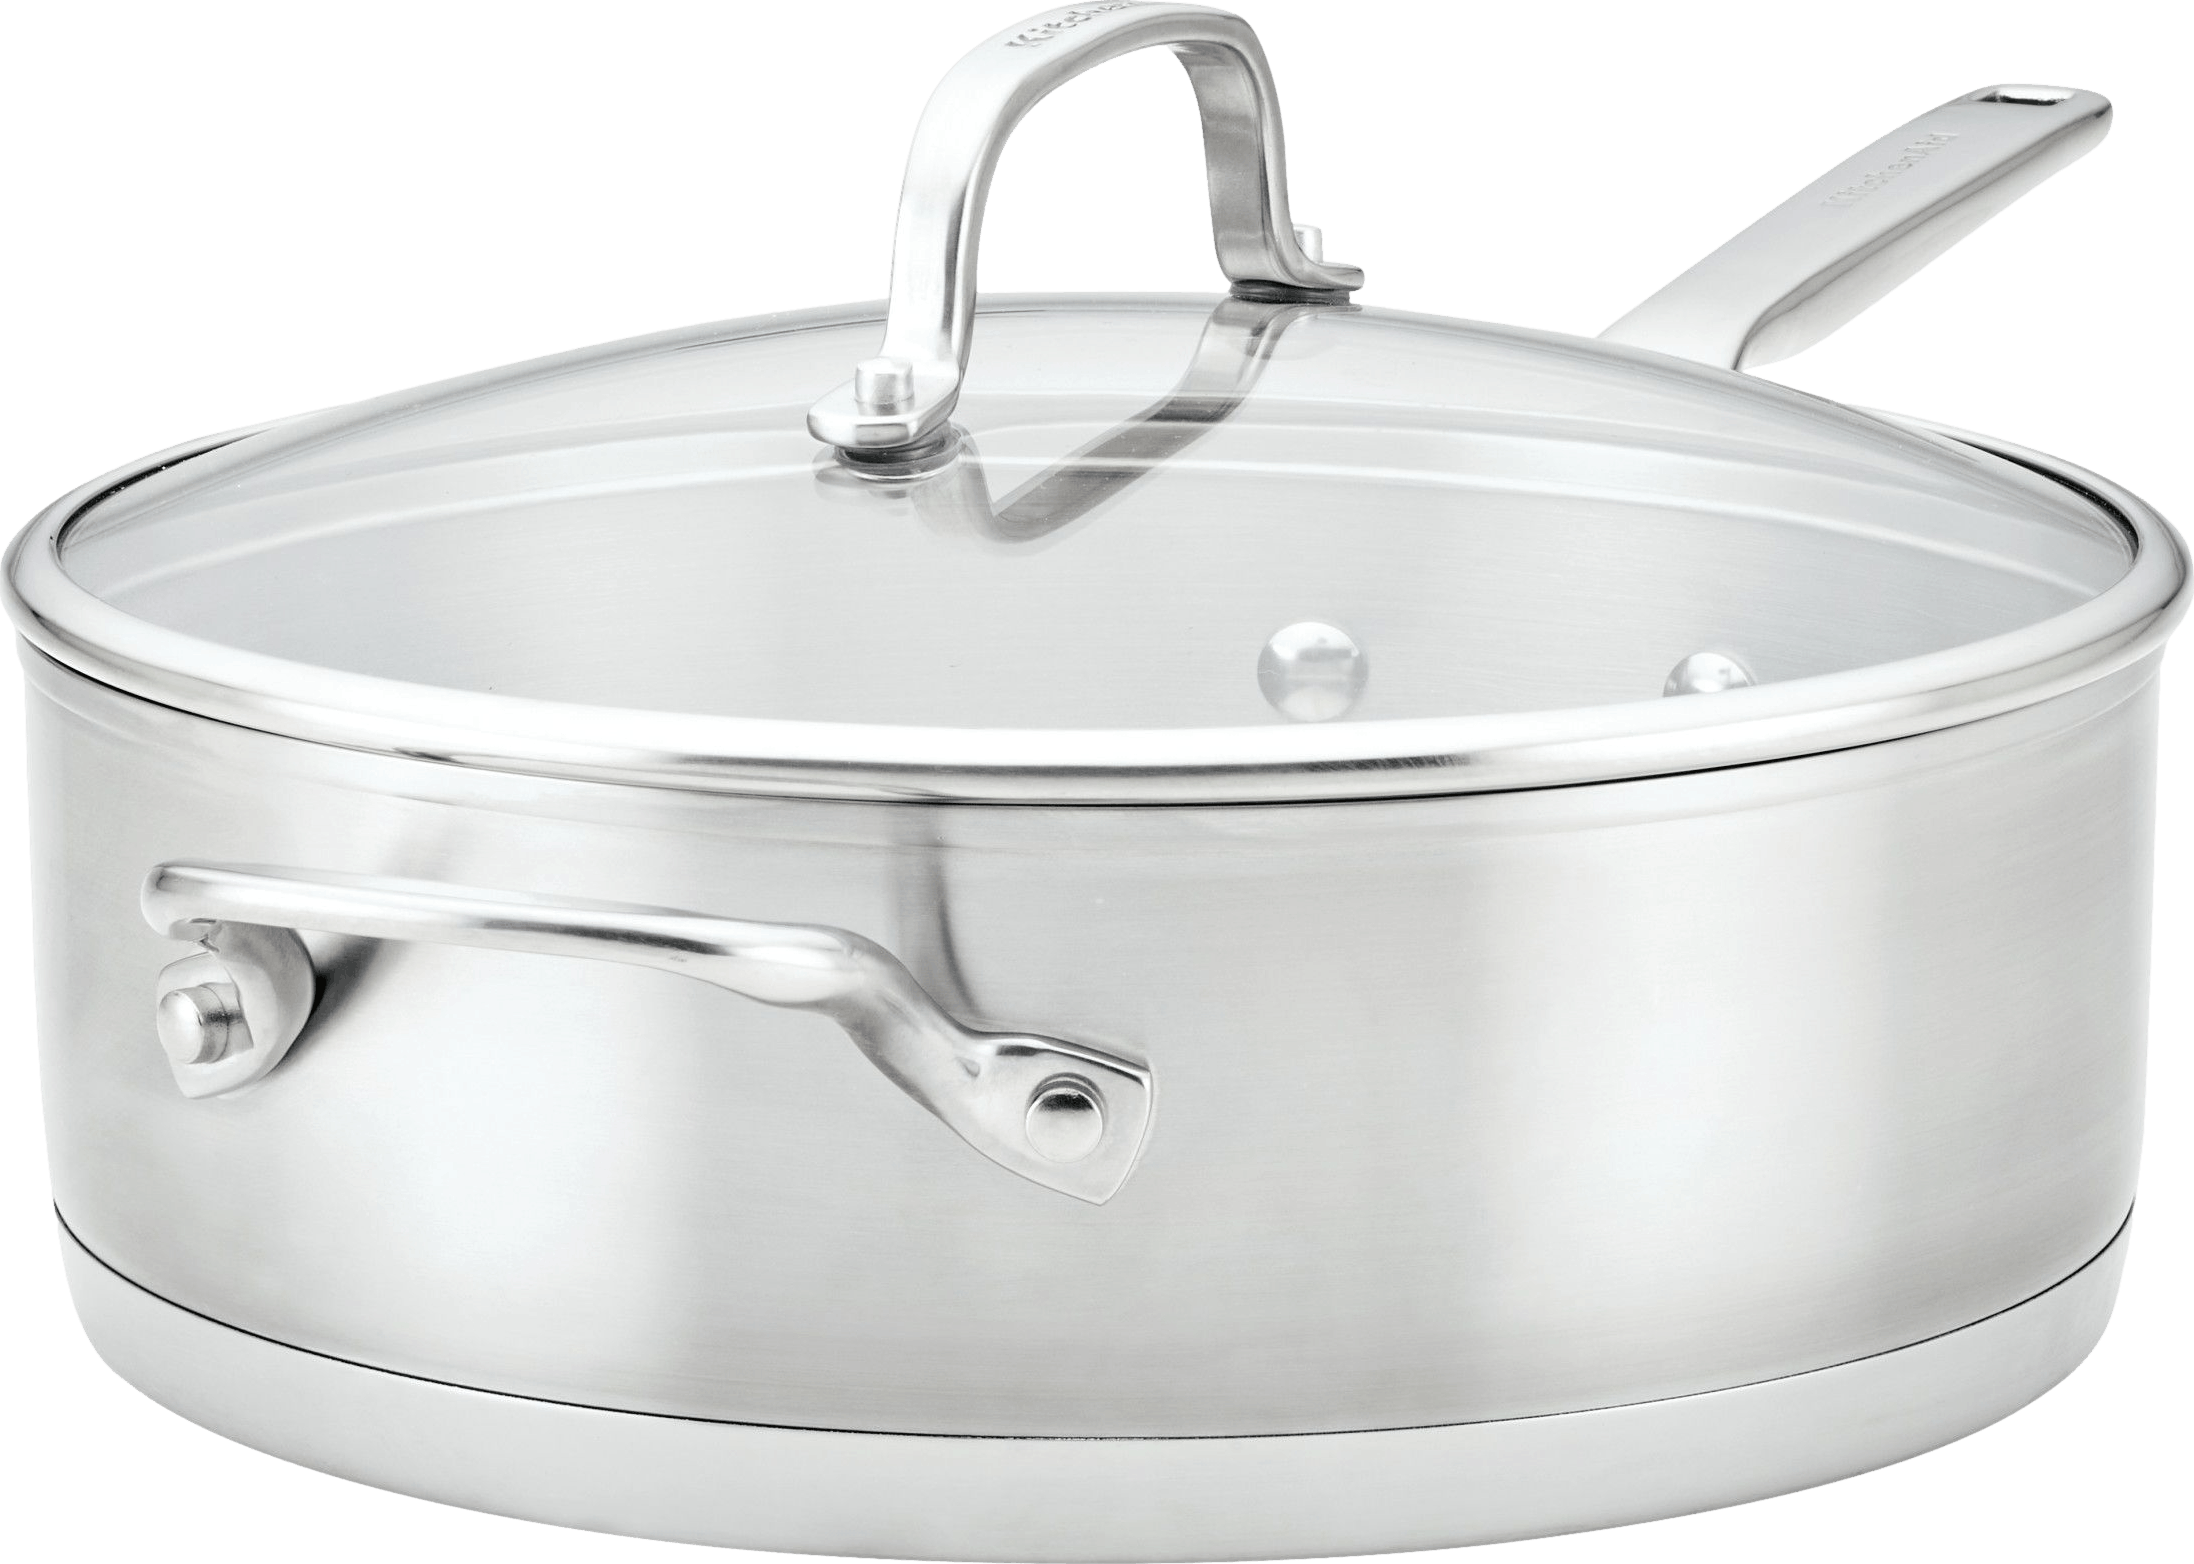 KitchenAid 3-Ply Base Stainless Steel Induction Saute Pan with Helper Handle and Lid, 4.5-Quart, Brushed Stainless Steel